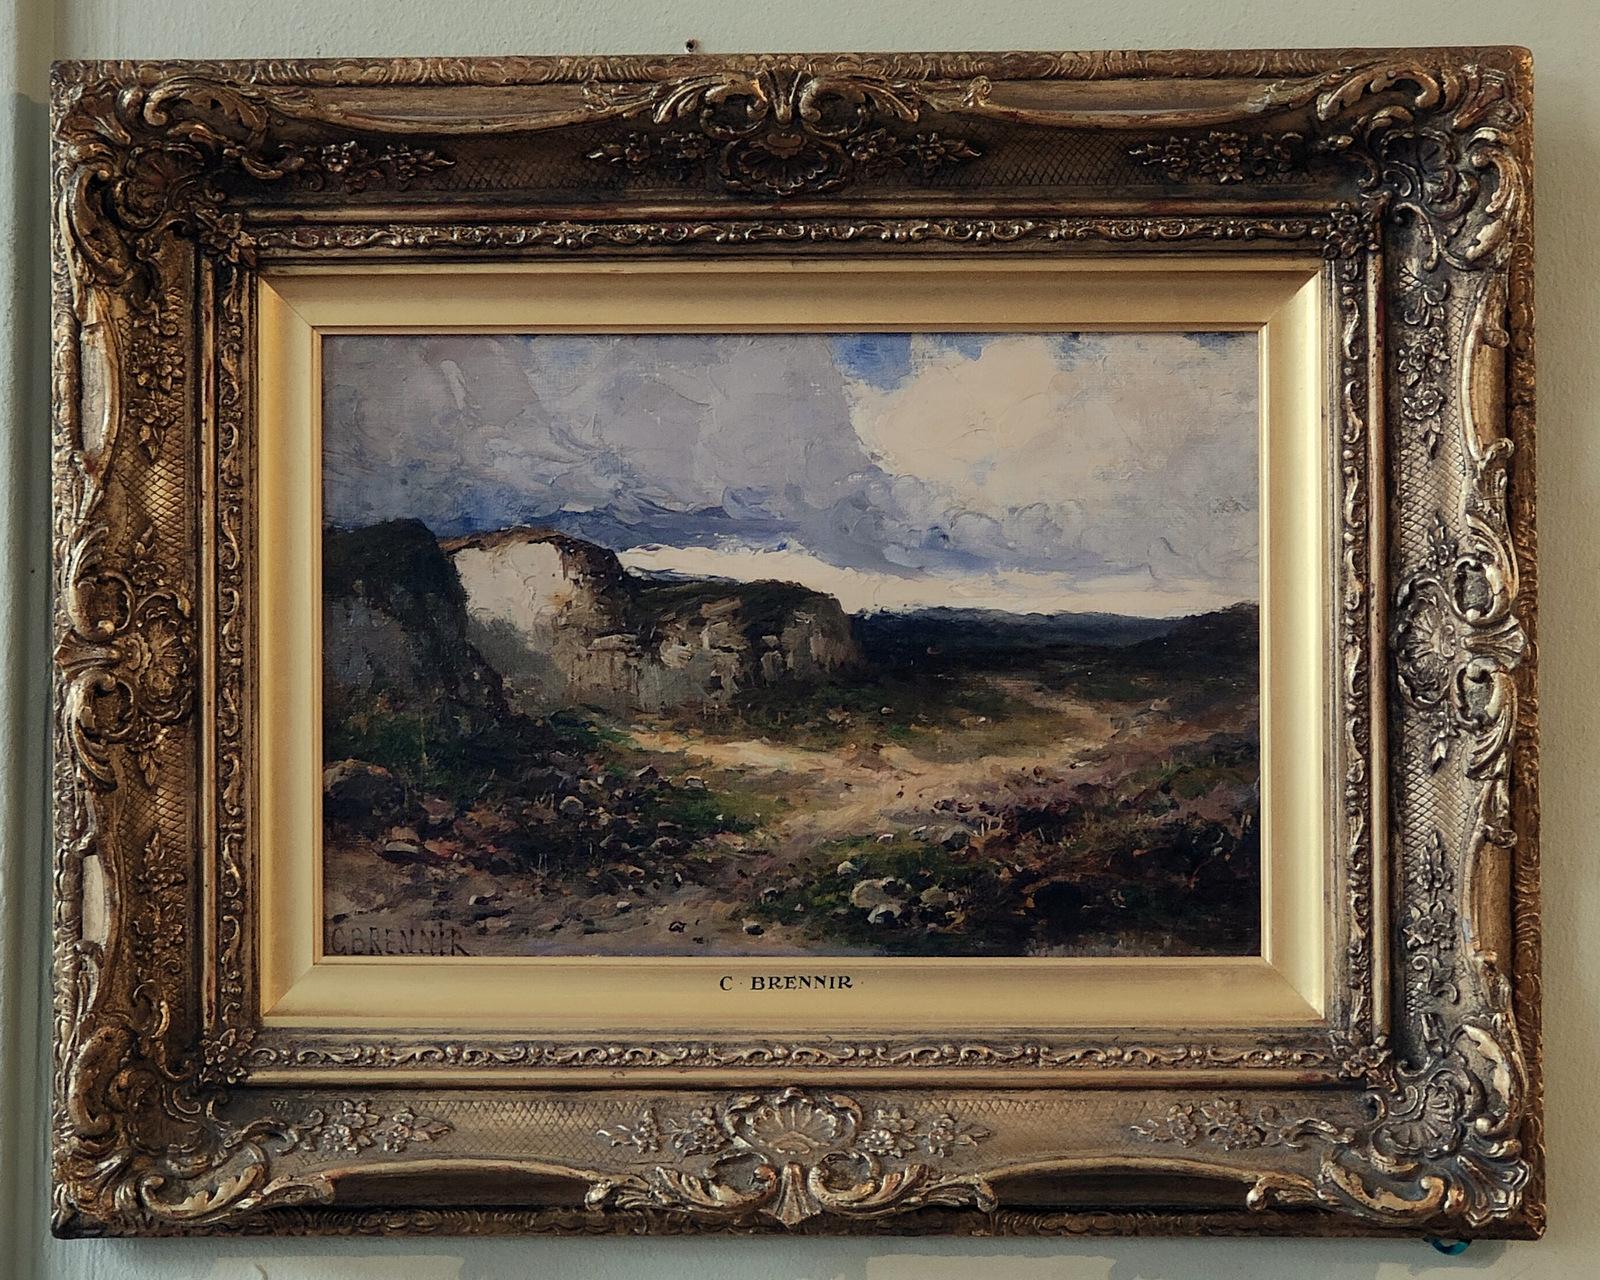 Oil Painting by Carl Brennir  "A Rough Hillside Road Scotland" 1850 -1924 Member of the Nottingham society of artists who also exhibited at the Royal Academy Birmingham and Manchester city of art gallery. Oil on board.

Dimensions unframed:
height